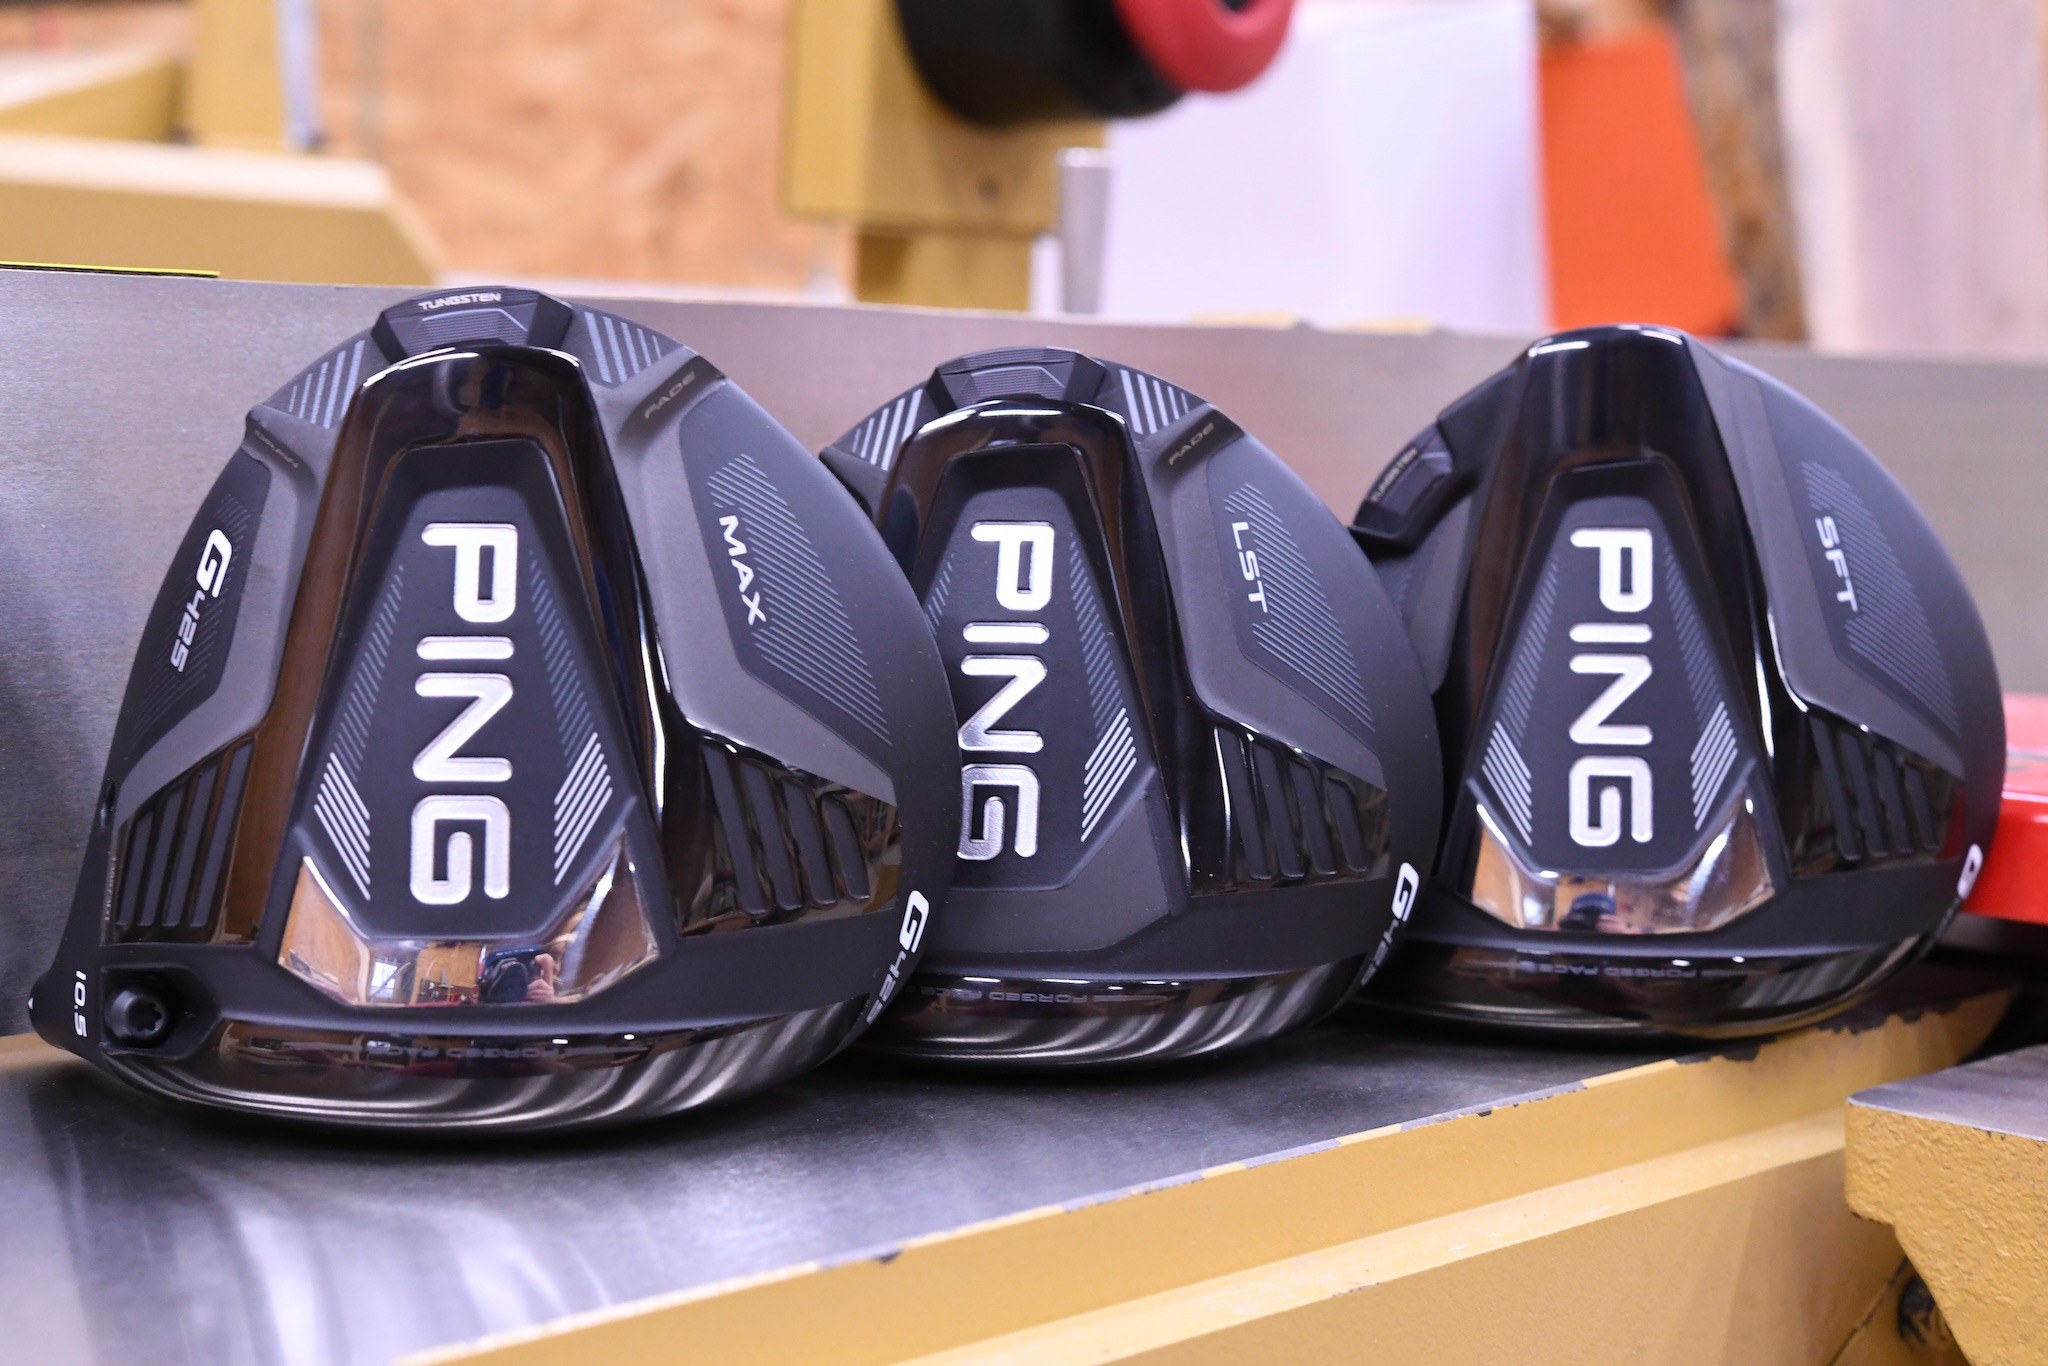 2021 Ping G425 drivers offer greater stability, performance across 